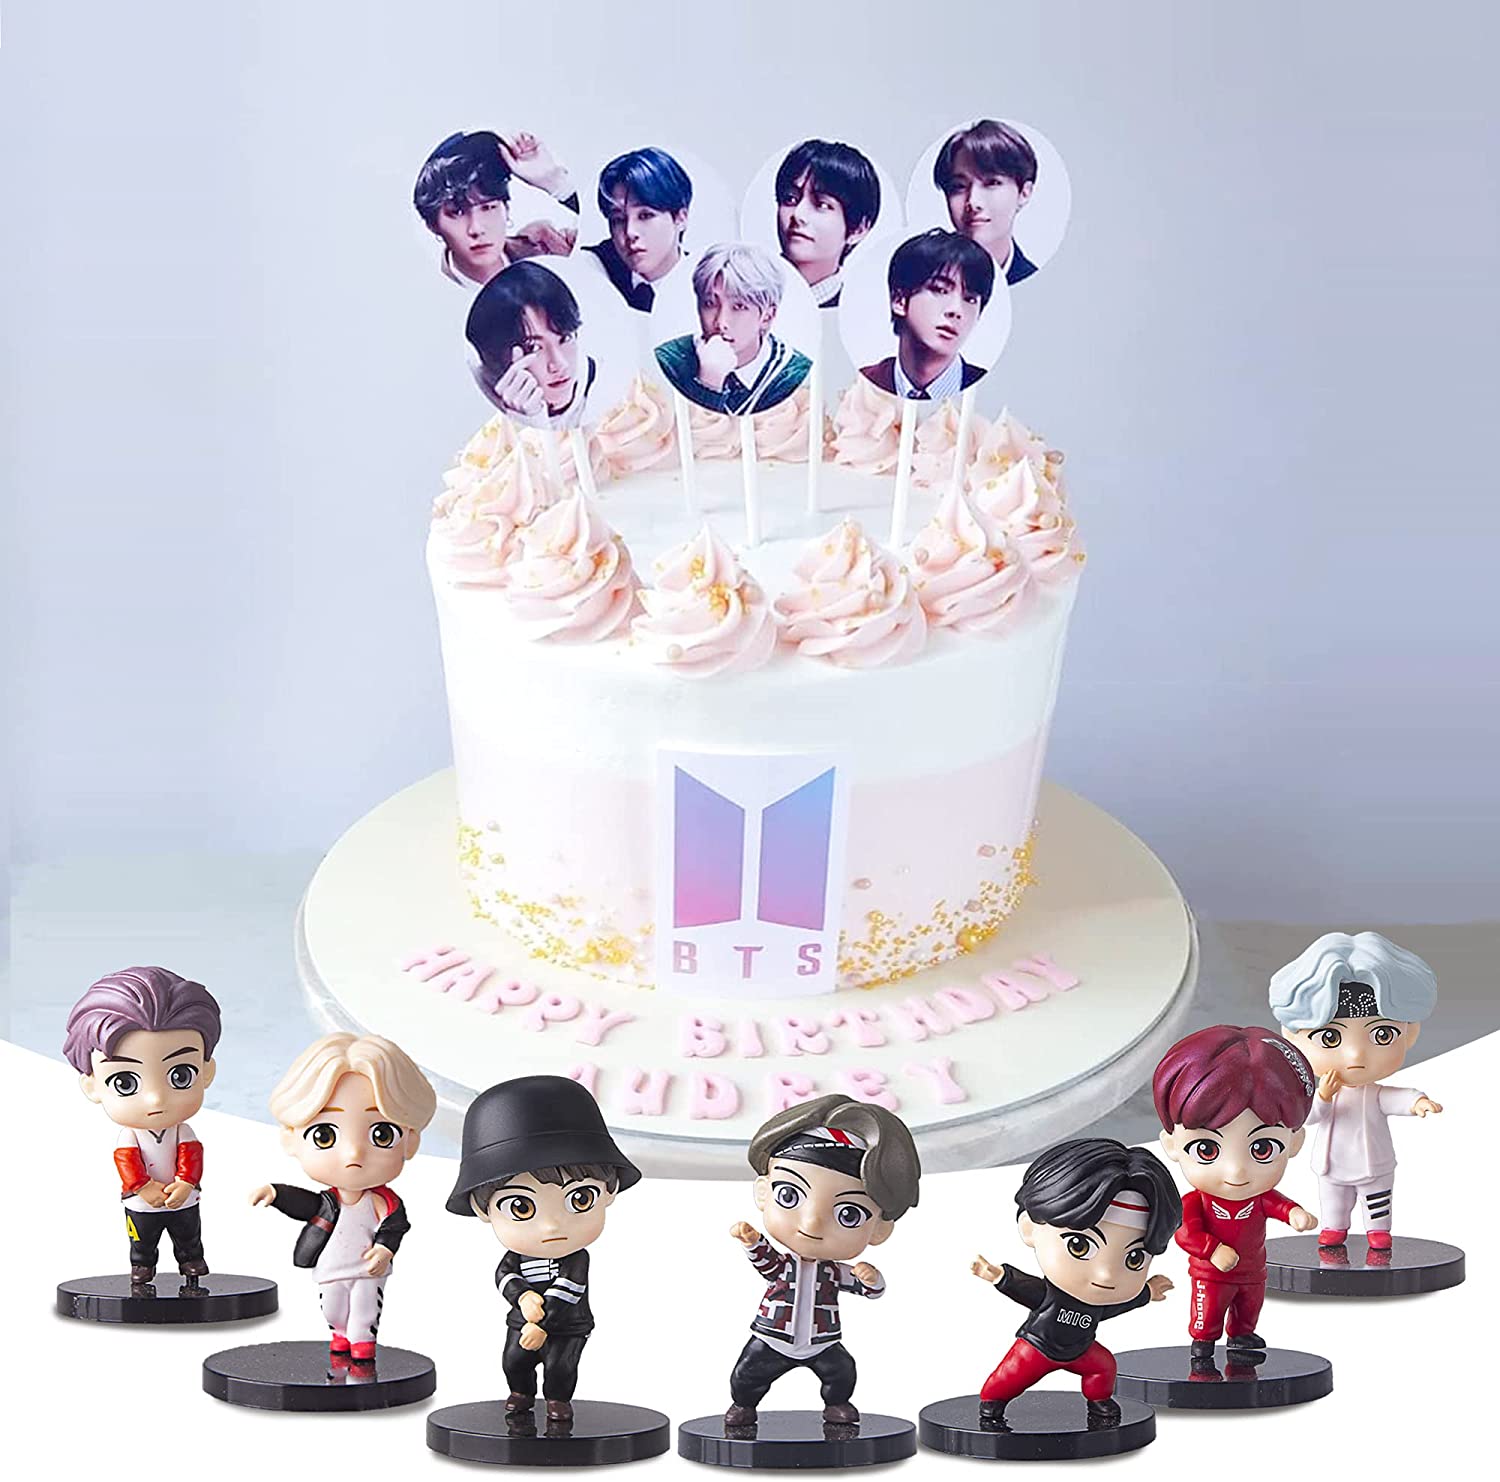 7 PCS B^TS Collection Figure Toy Set for Cake Topper B^TS Party Supplier Premium Cake Toppers and Party Decoration for B^TS party supplier